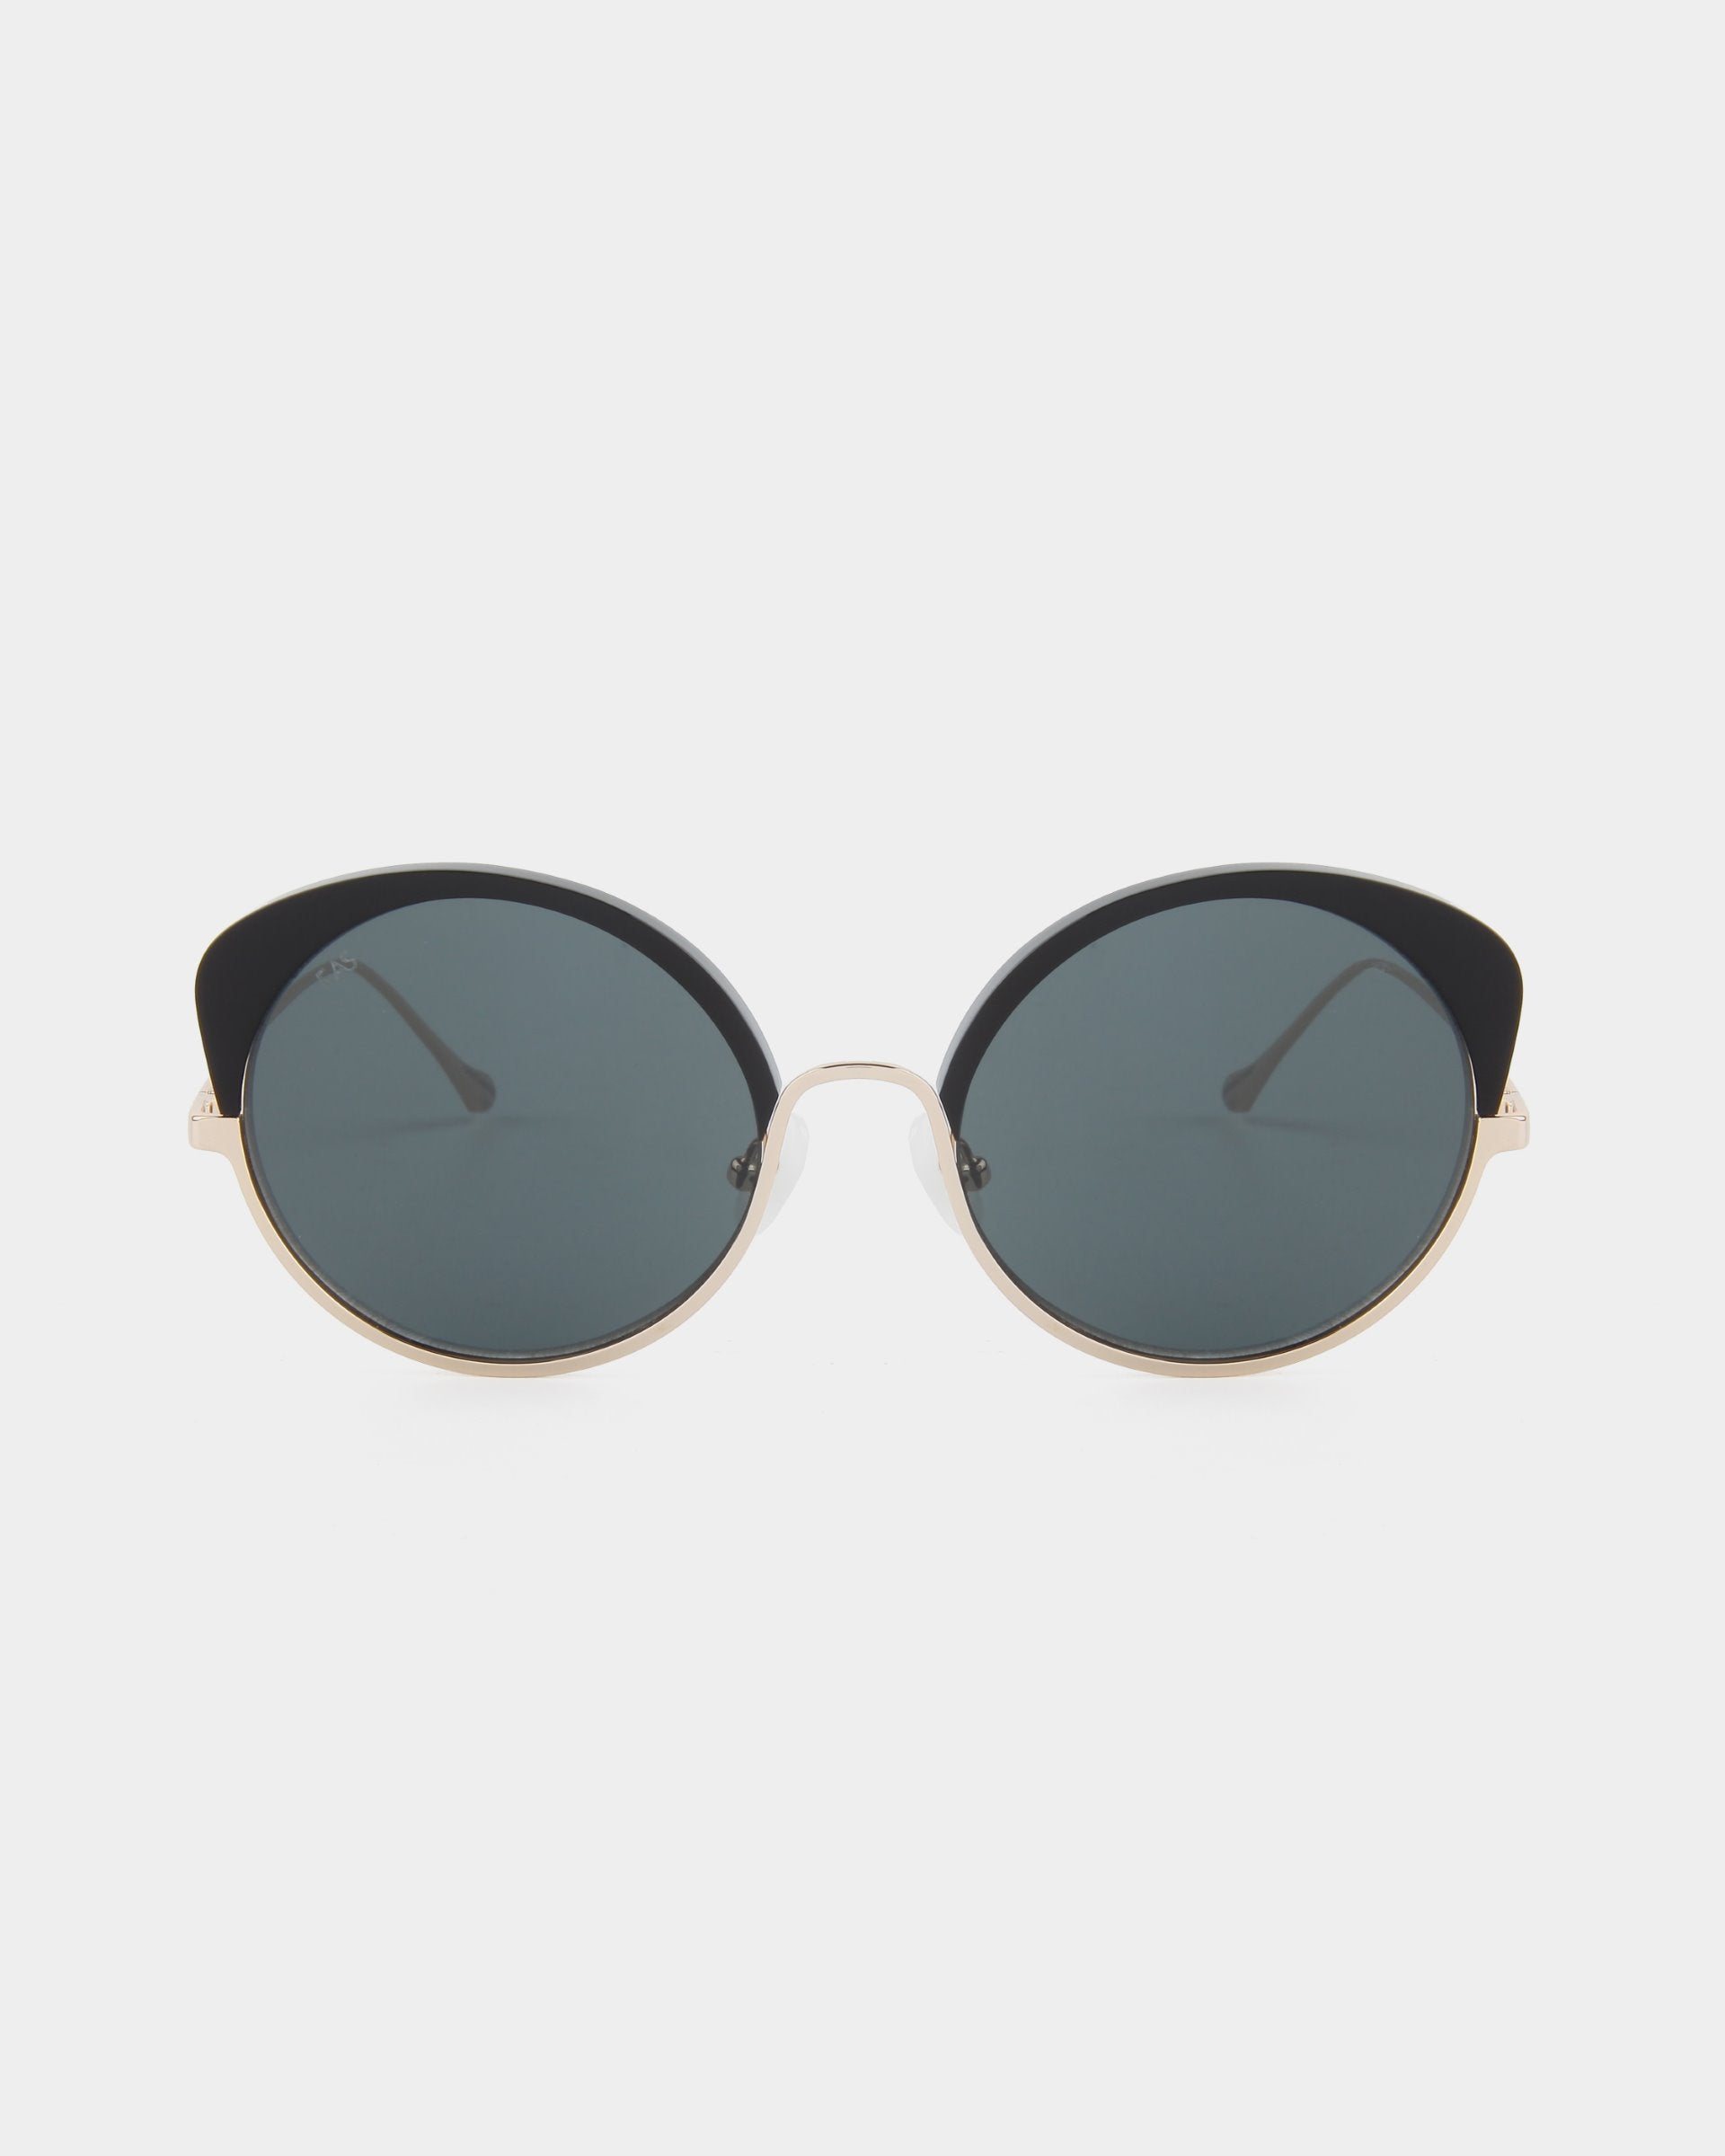 A pair of stylish Cocoon by For Art's Sake® sunglasses with black frames and dark tinted lenses, set against a plain white background. The temples are thin and metallic, adding to the sleek and modern design. This handcrafted eyewear also offers UV protection, ensuring both elegance and safety.